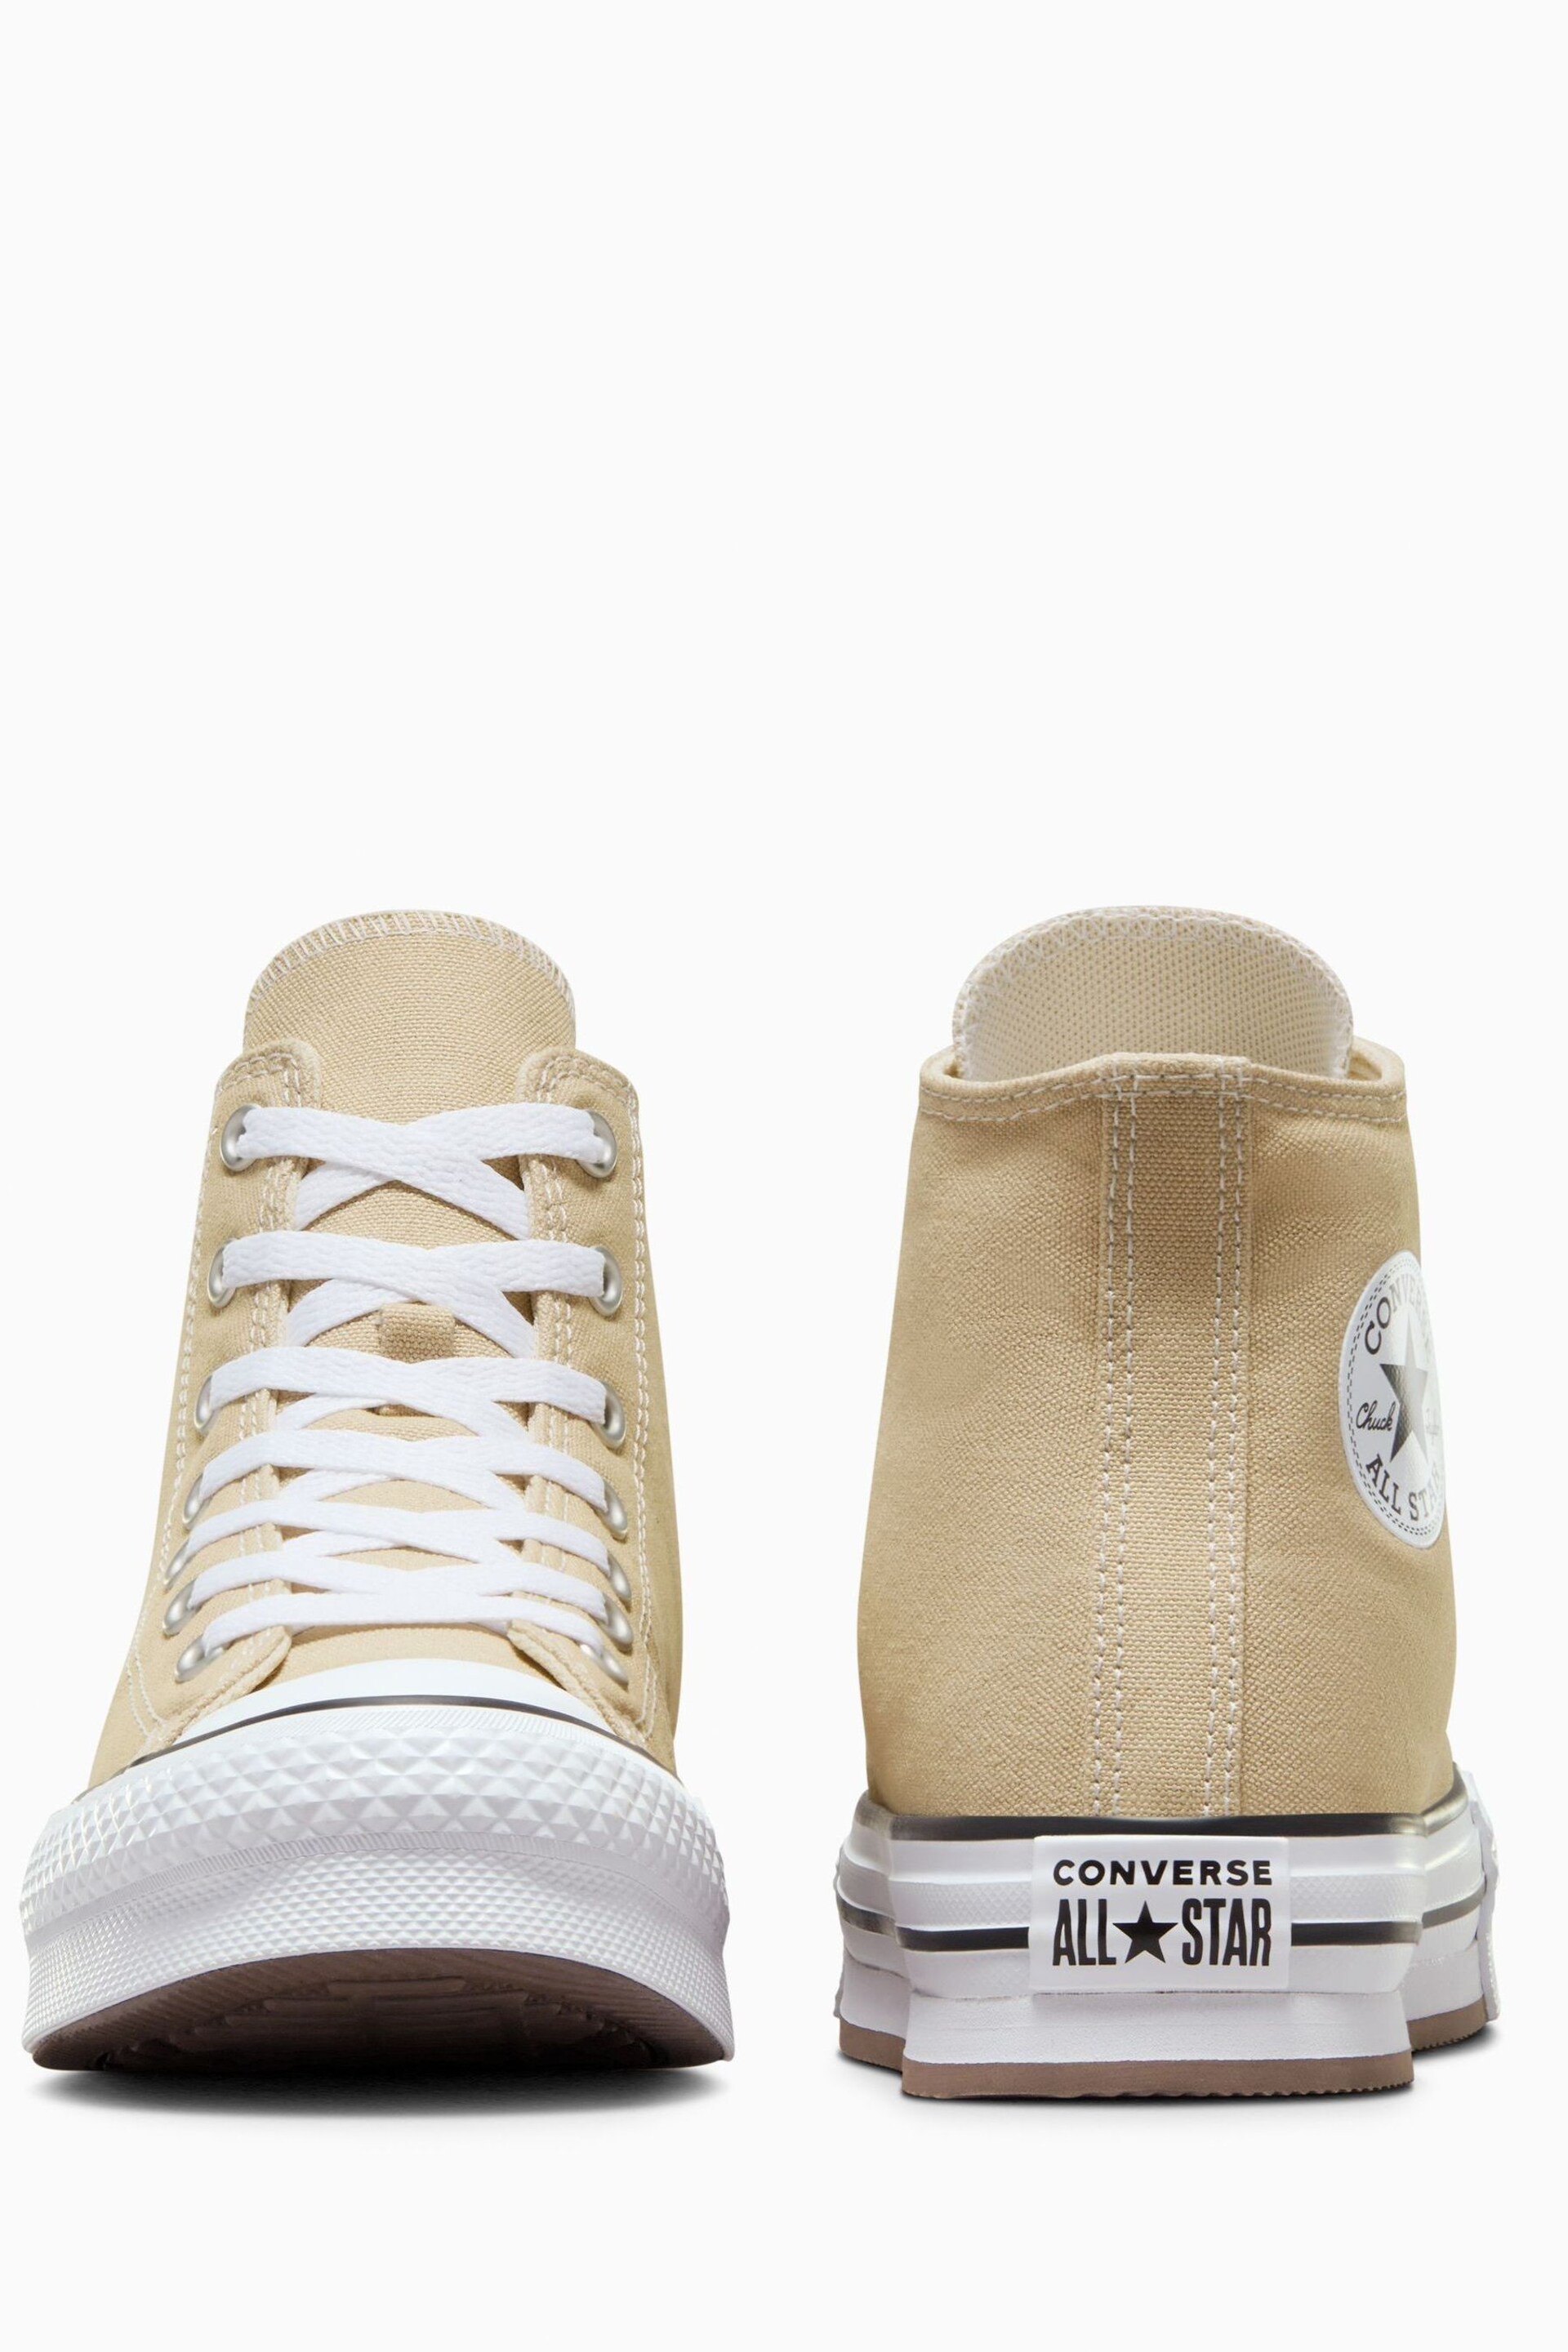 Converse Neutral All Star EVA Lift Junior Trainers - Image 5 of 7